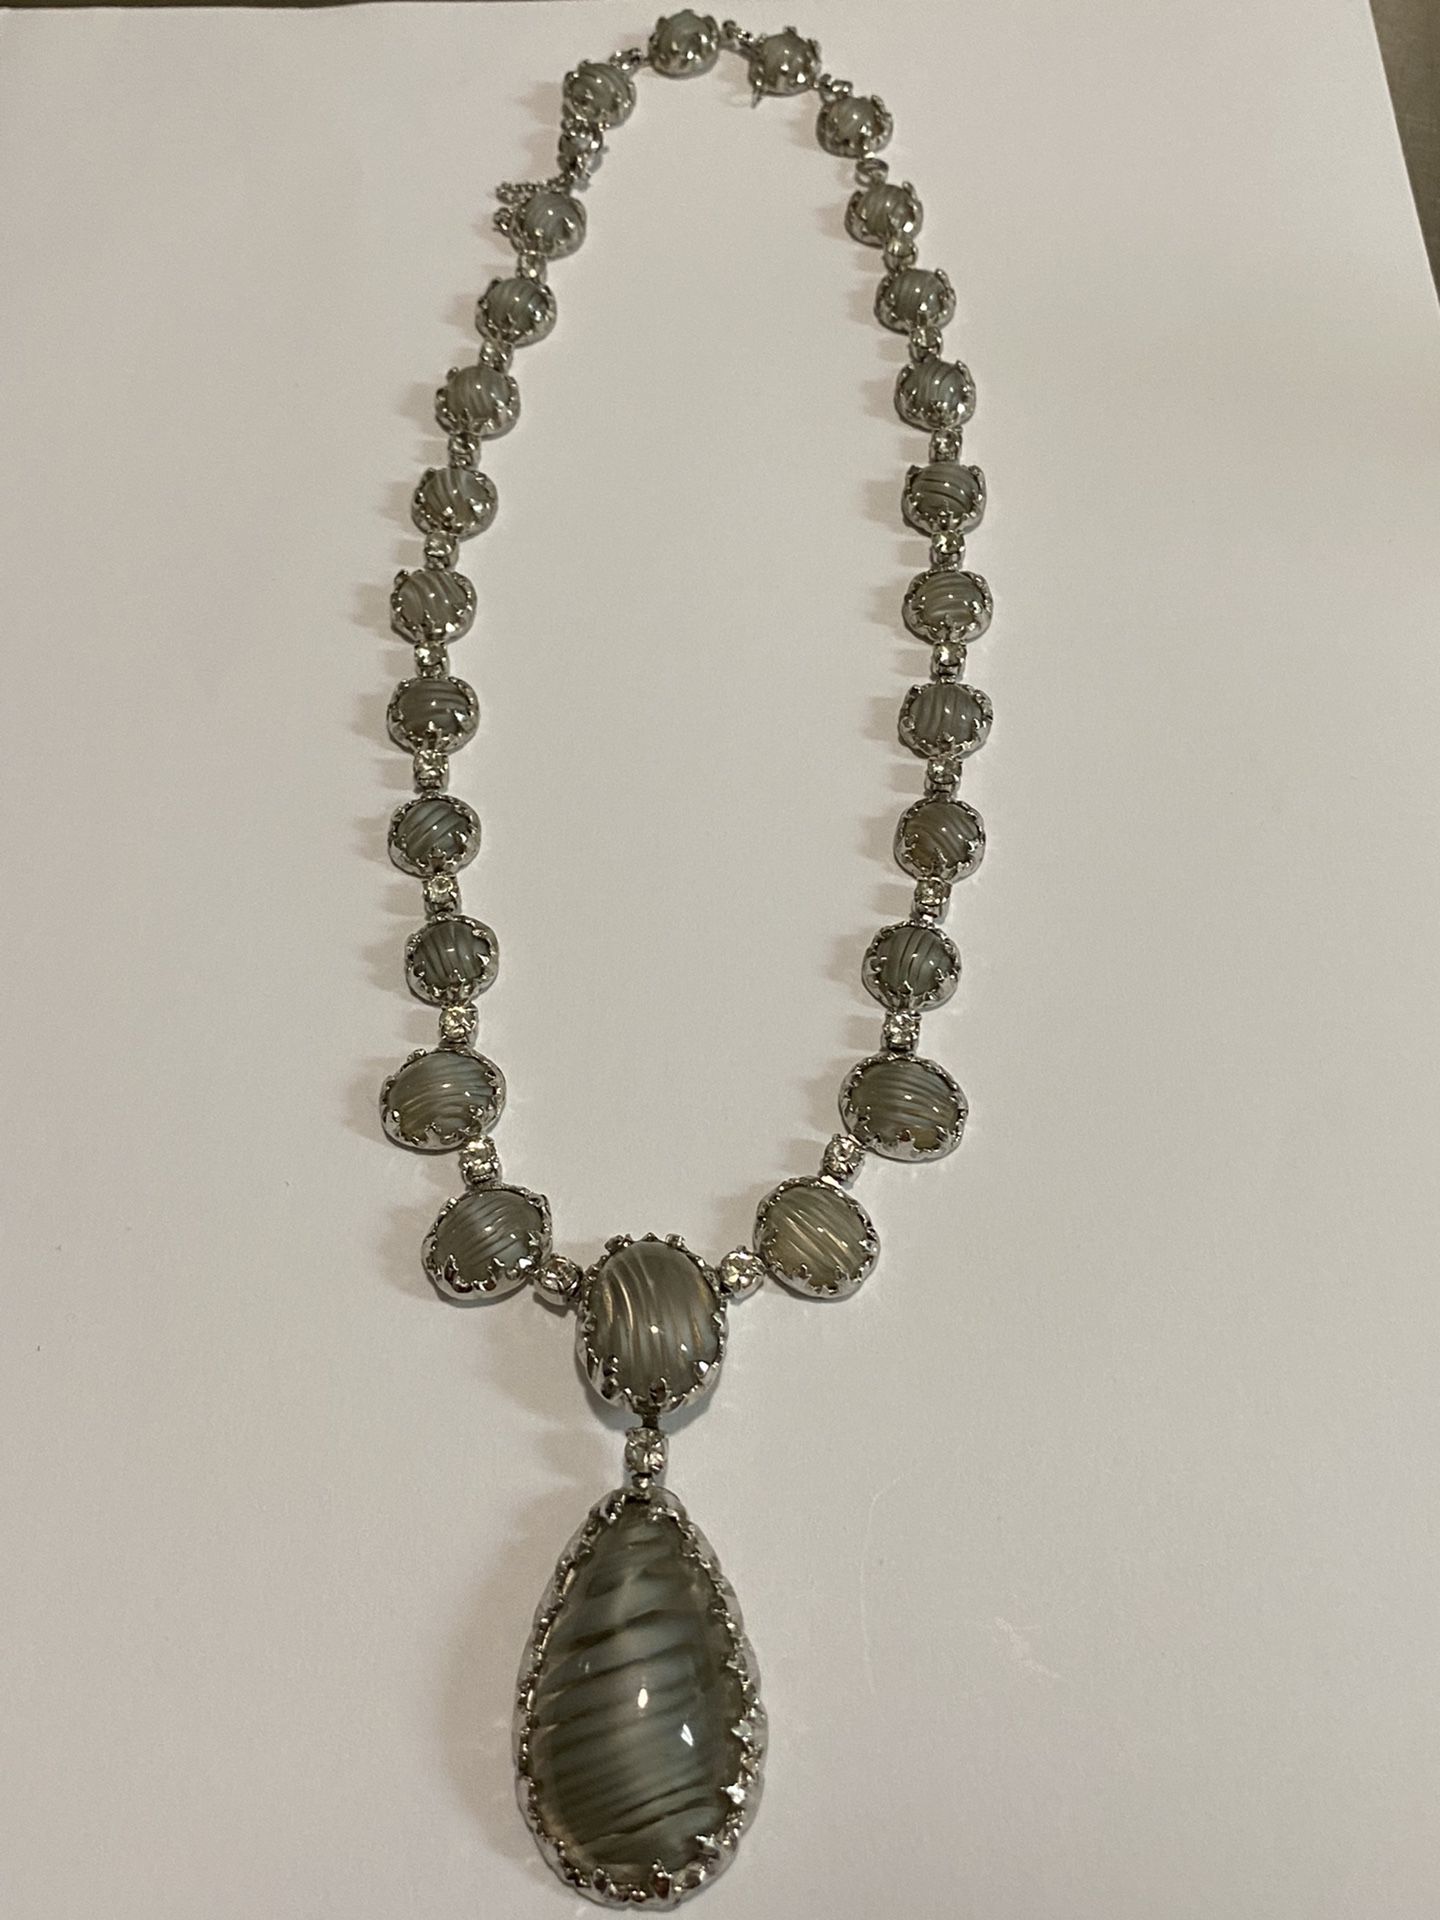 A beautiful glass and paste Necklace , Christian Dior by Mitchel Maer, 1950s